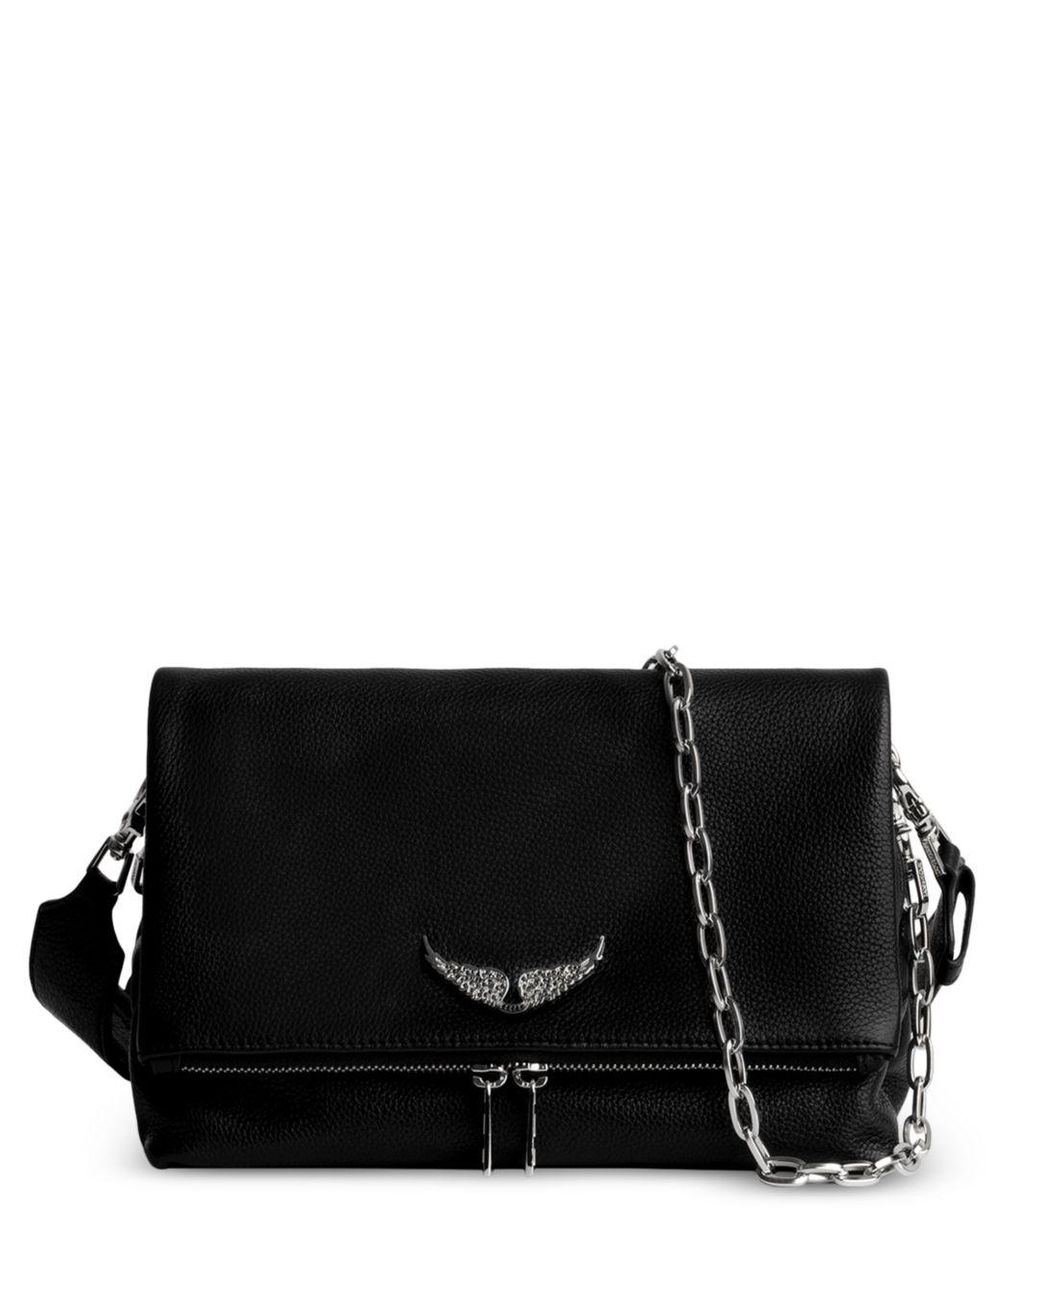 Zadig & Voltaire Zv Rocky Leather Swing Bag in Black | Lyst